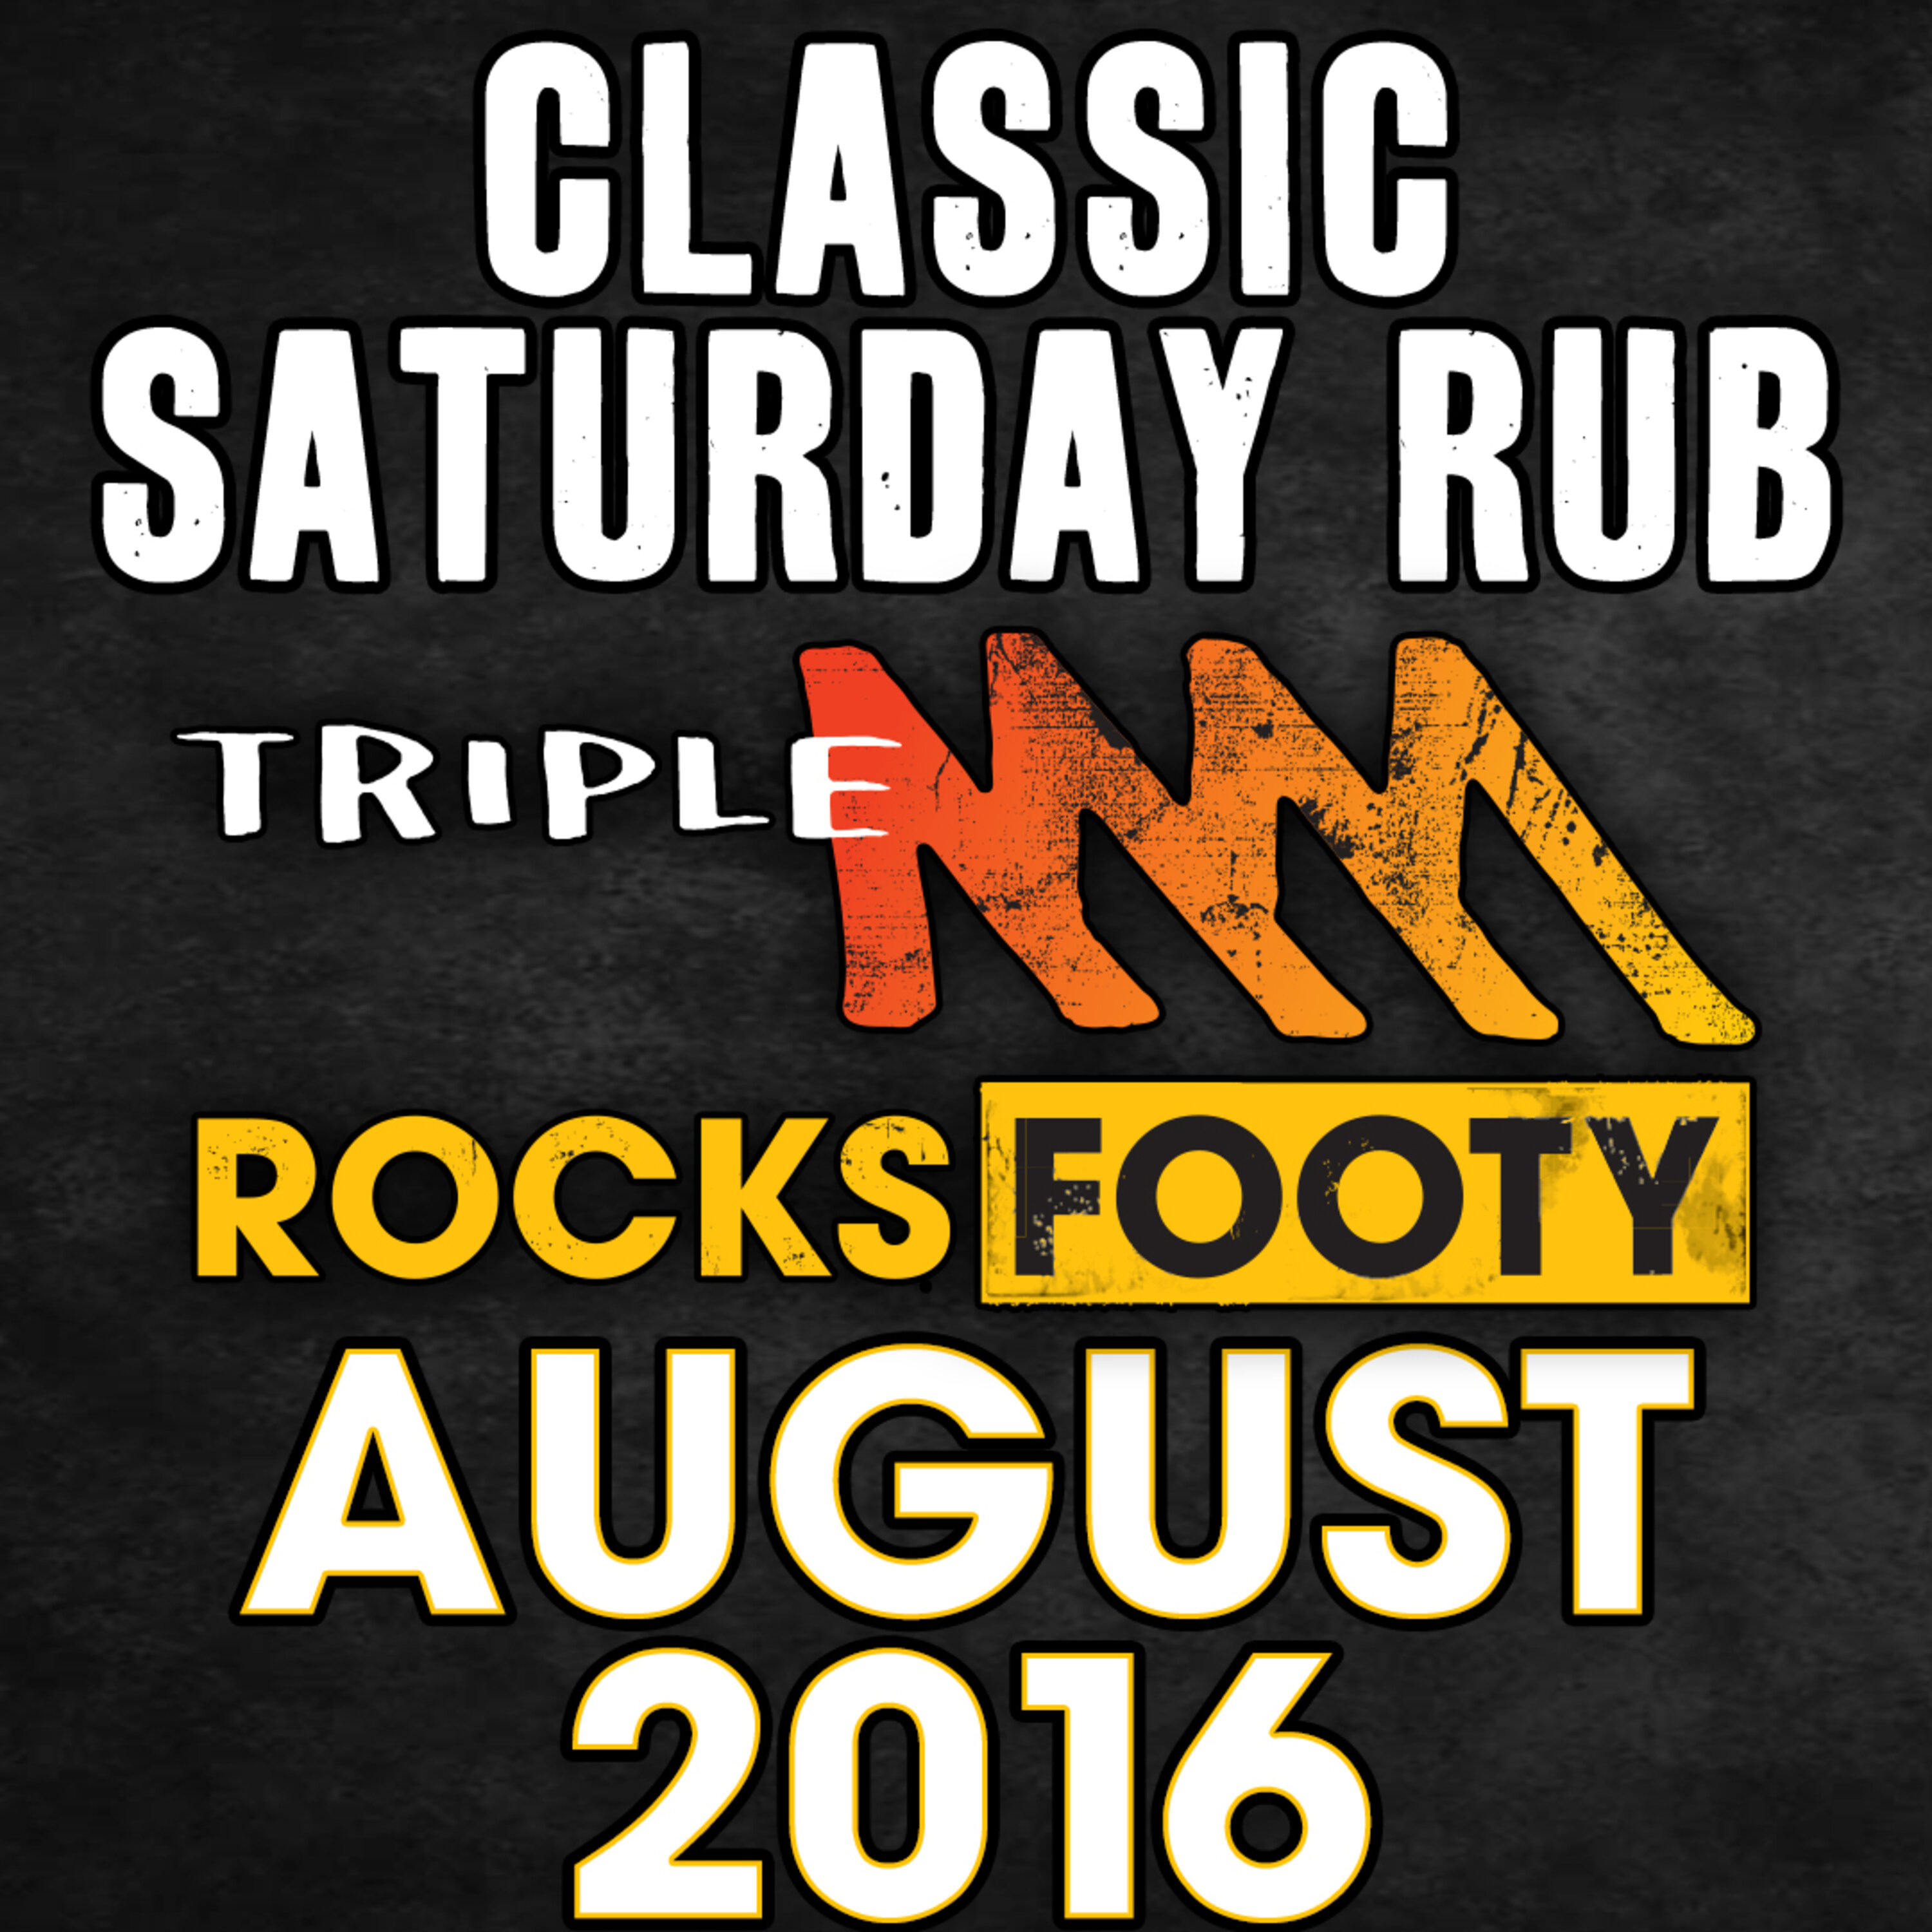 CLASSIC SATURDAY RUB | Spud and Chief paste Luke Darcy for his conduct during the 2016 Olympics